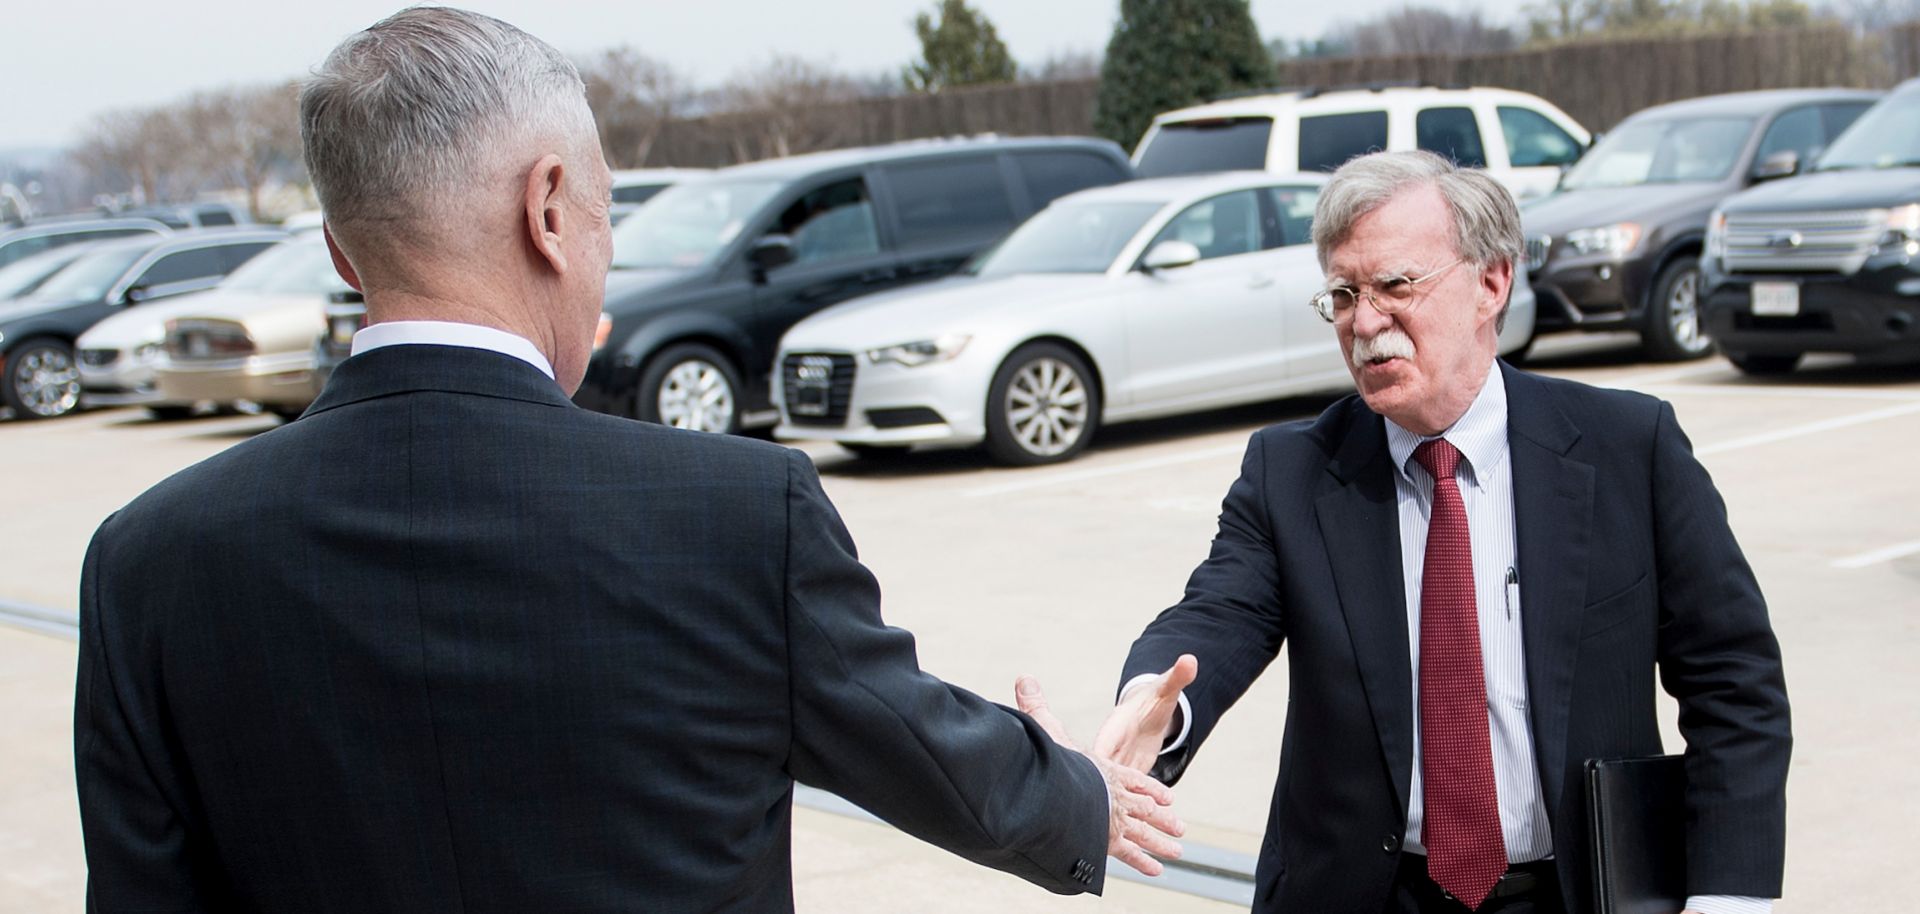 John Bolton, right, who is expected to take the helm as U.S. national security adviser on April 9, greets U.S. Secretary of Defense James Mattis outside the Pentagon.